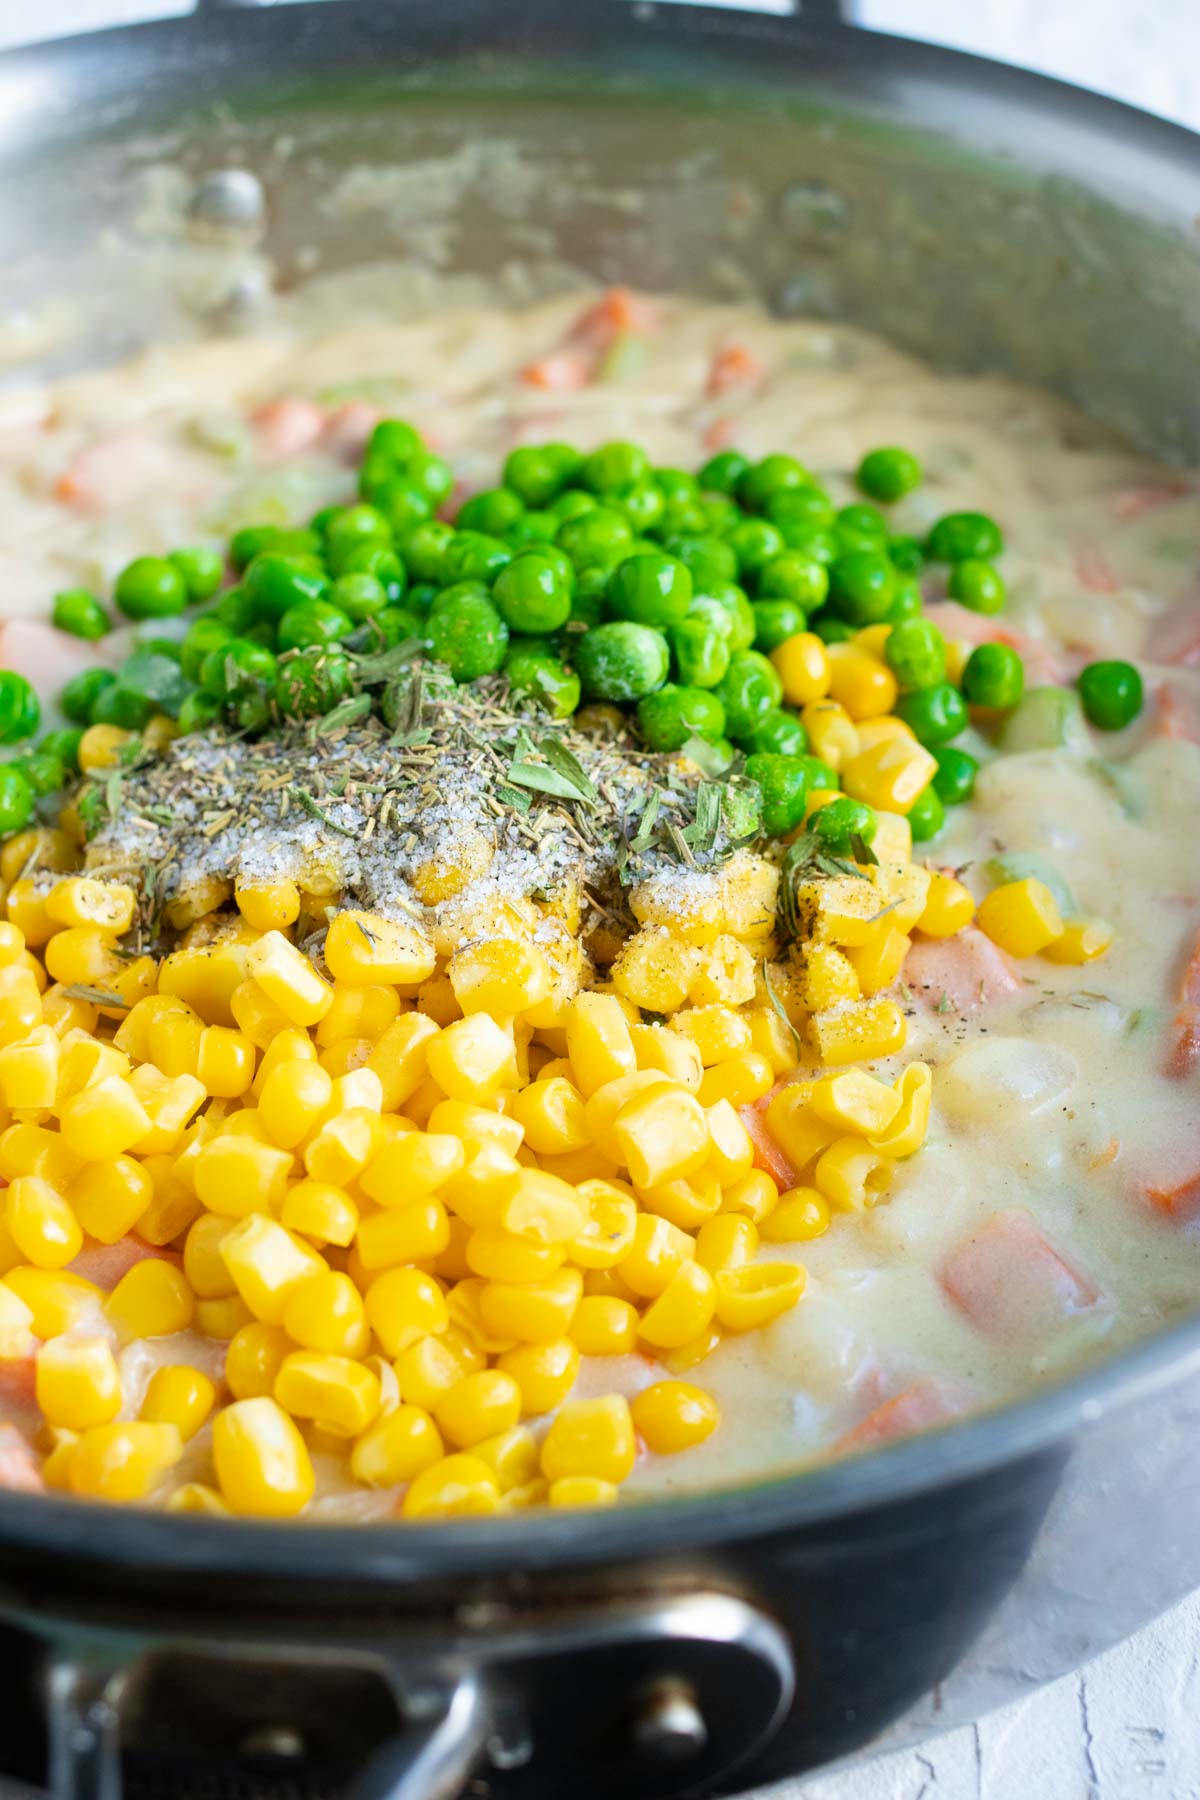 Corn, peas, and herbs are added to the filling.